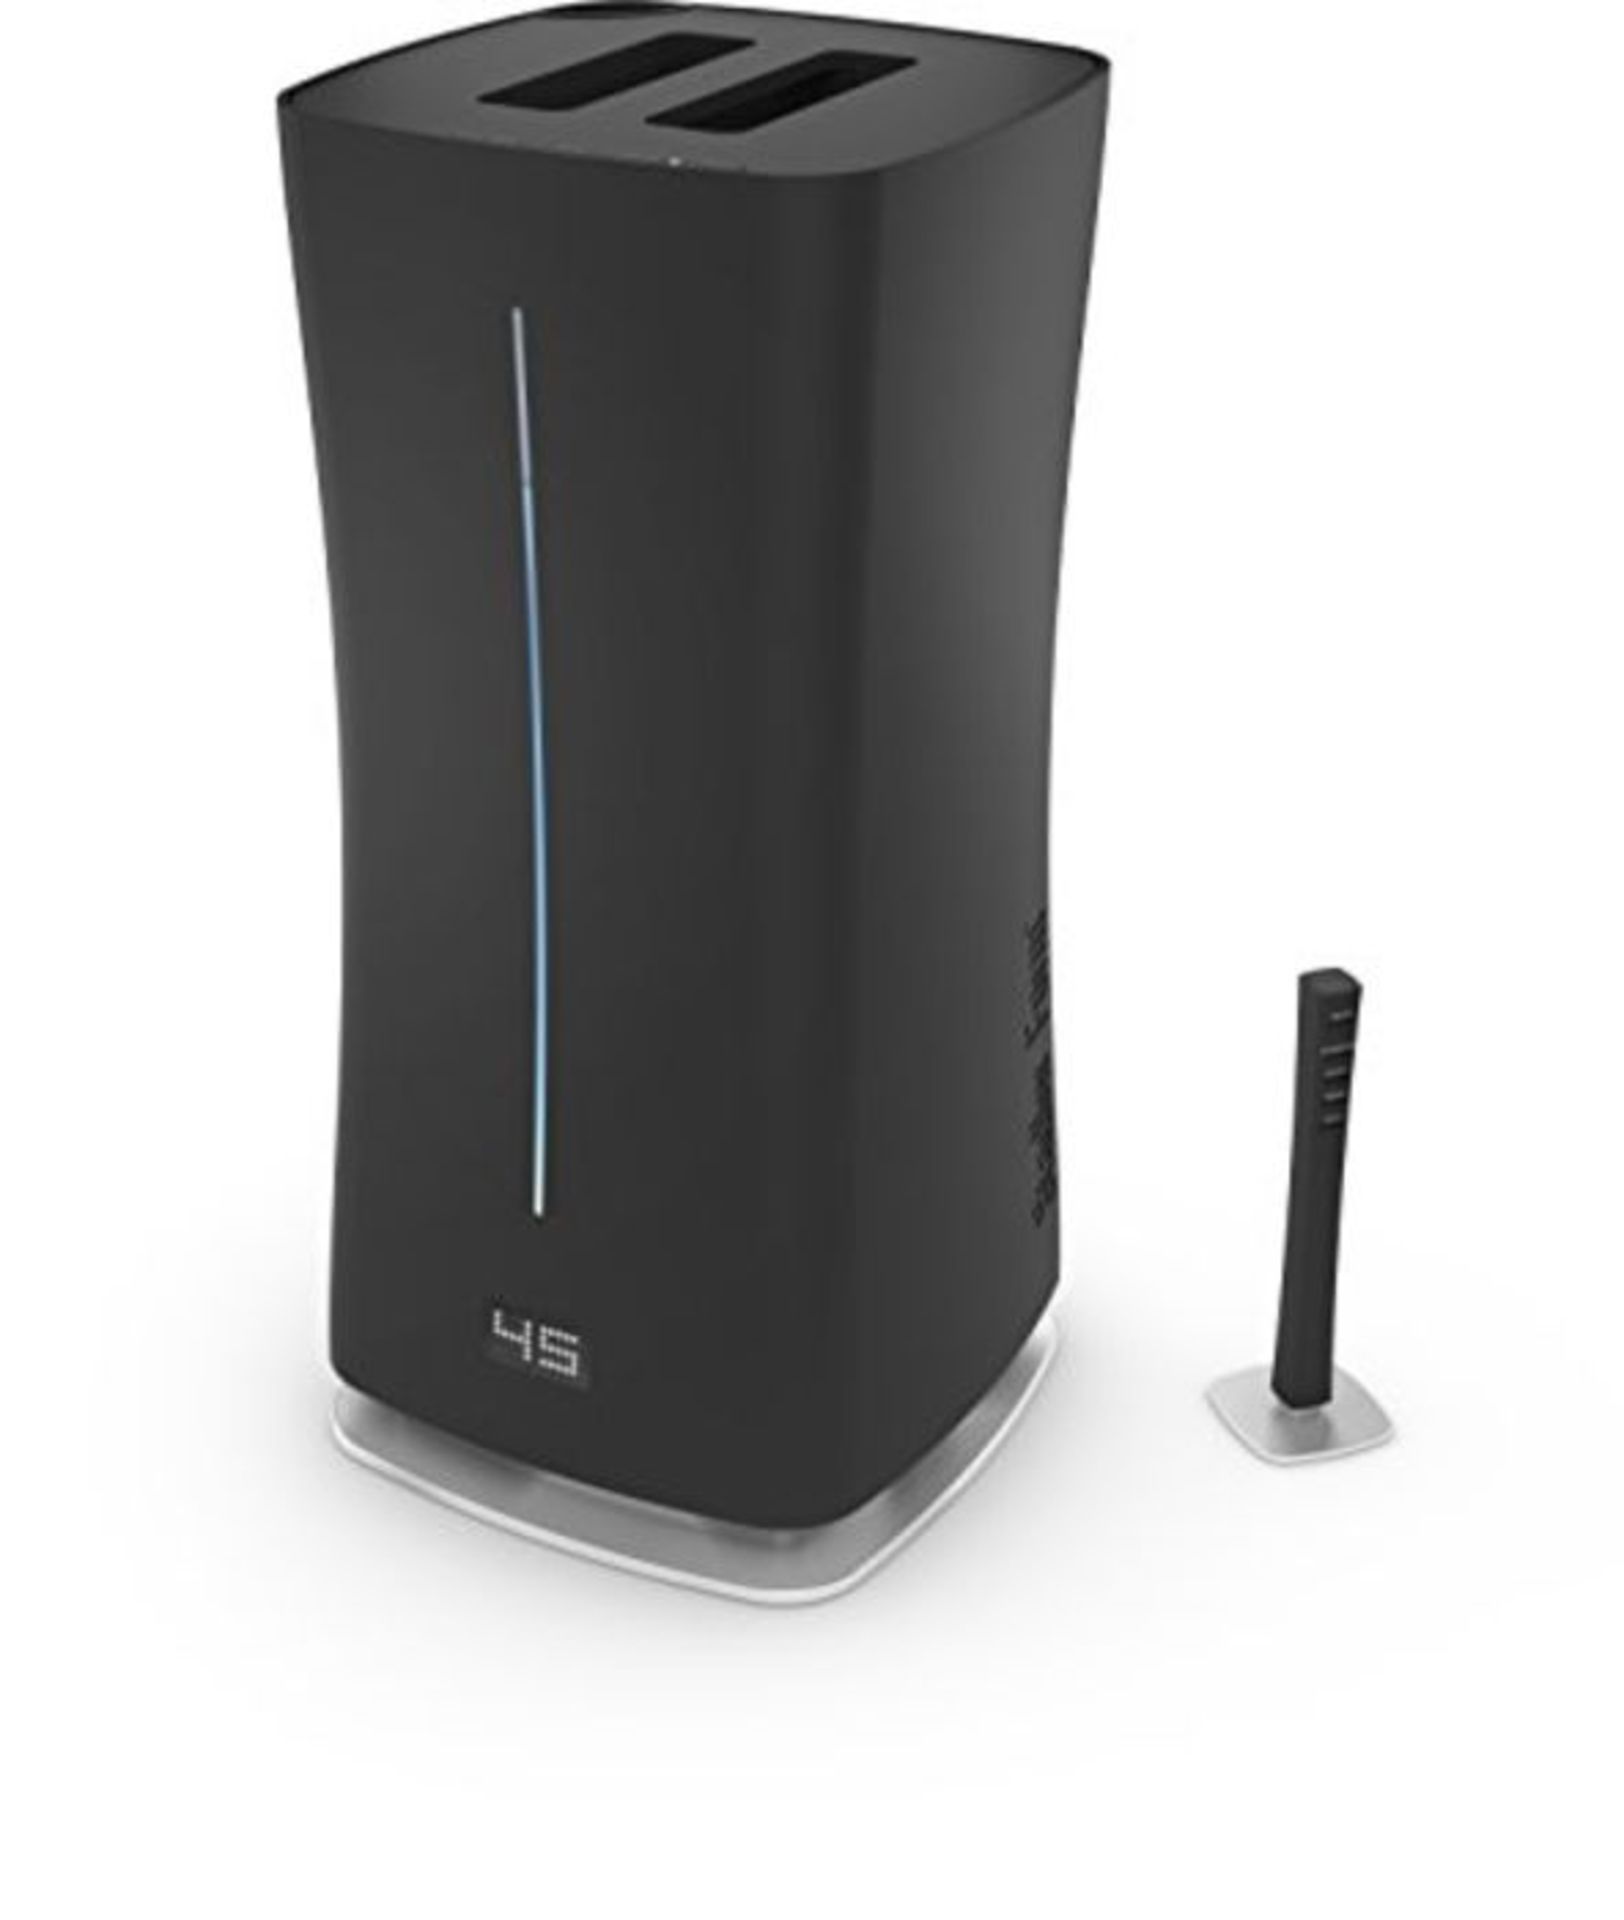 RRP £164.00 Stadler Form Eva Room Humidifier, External Humidity sensor, Auto mode for rooms up to